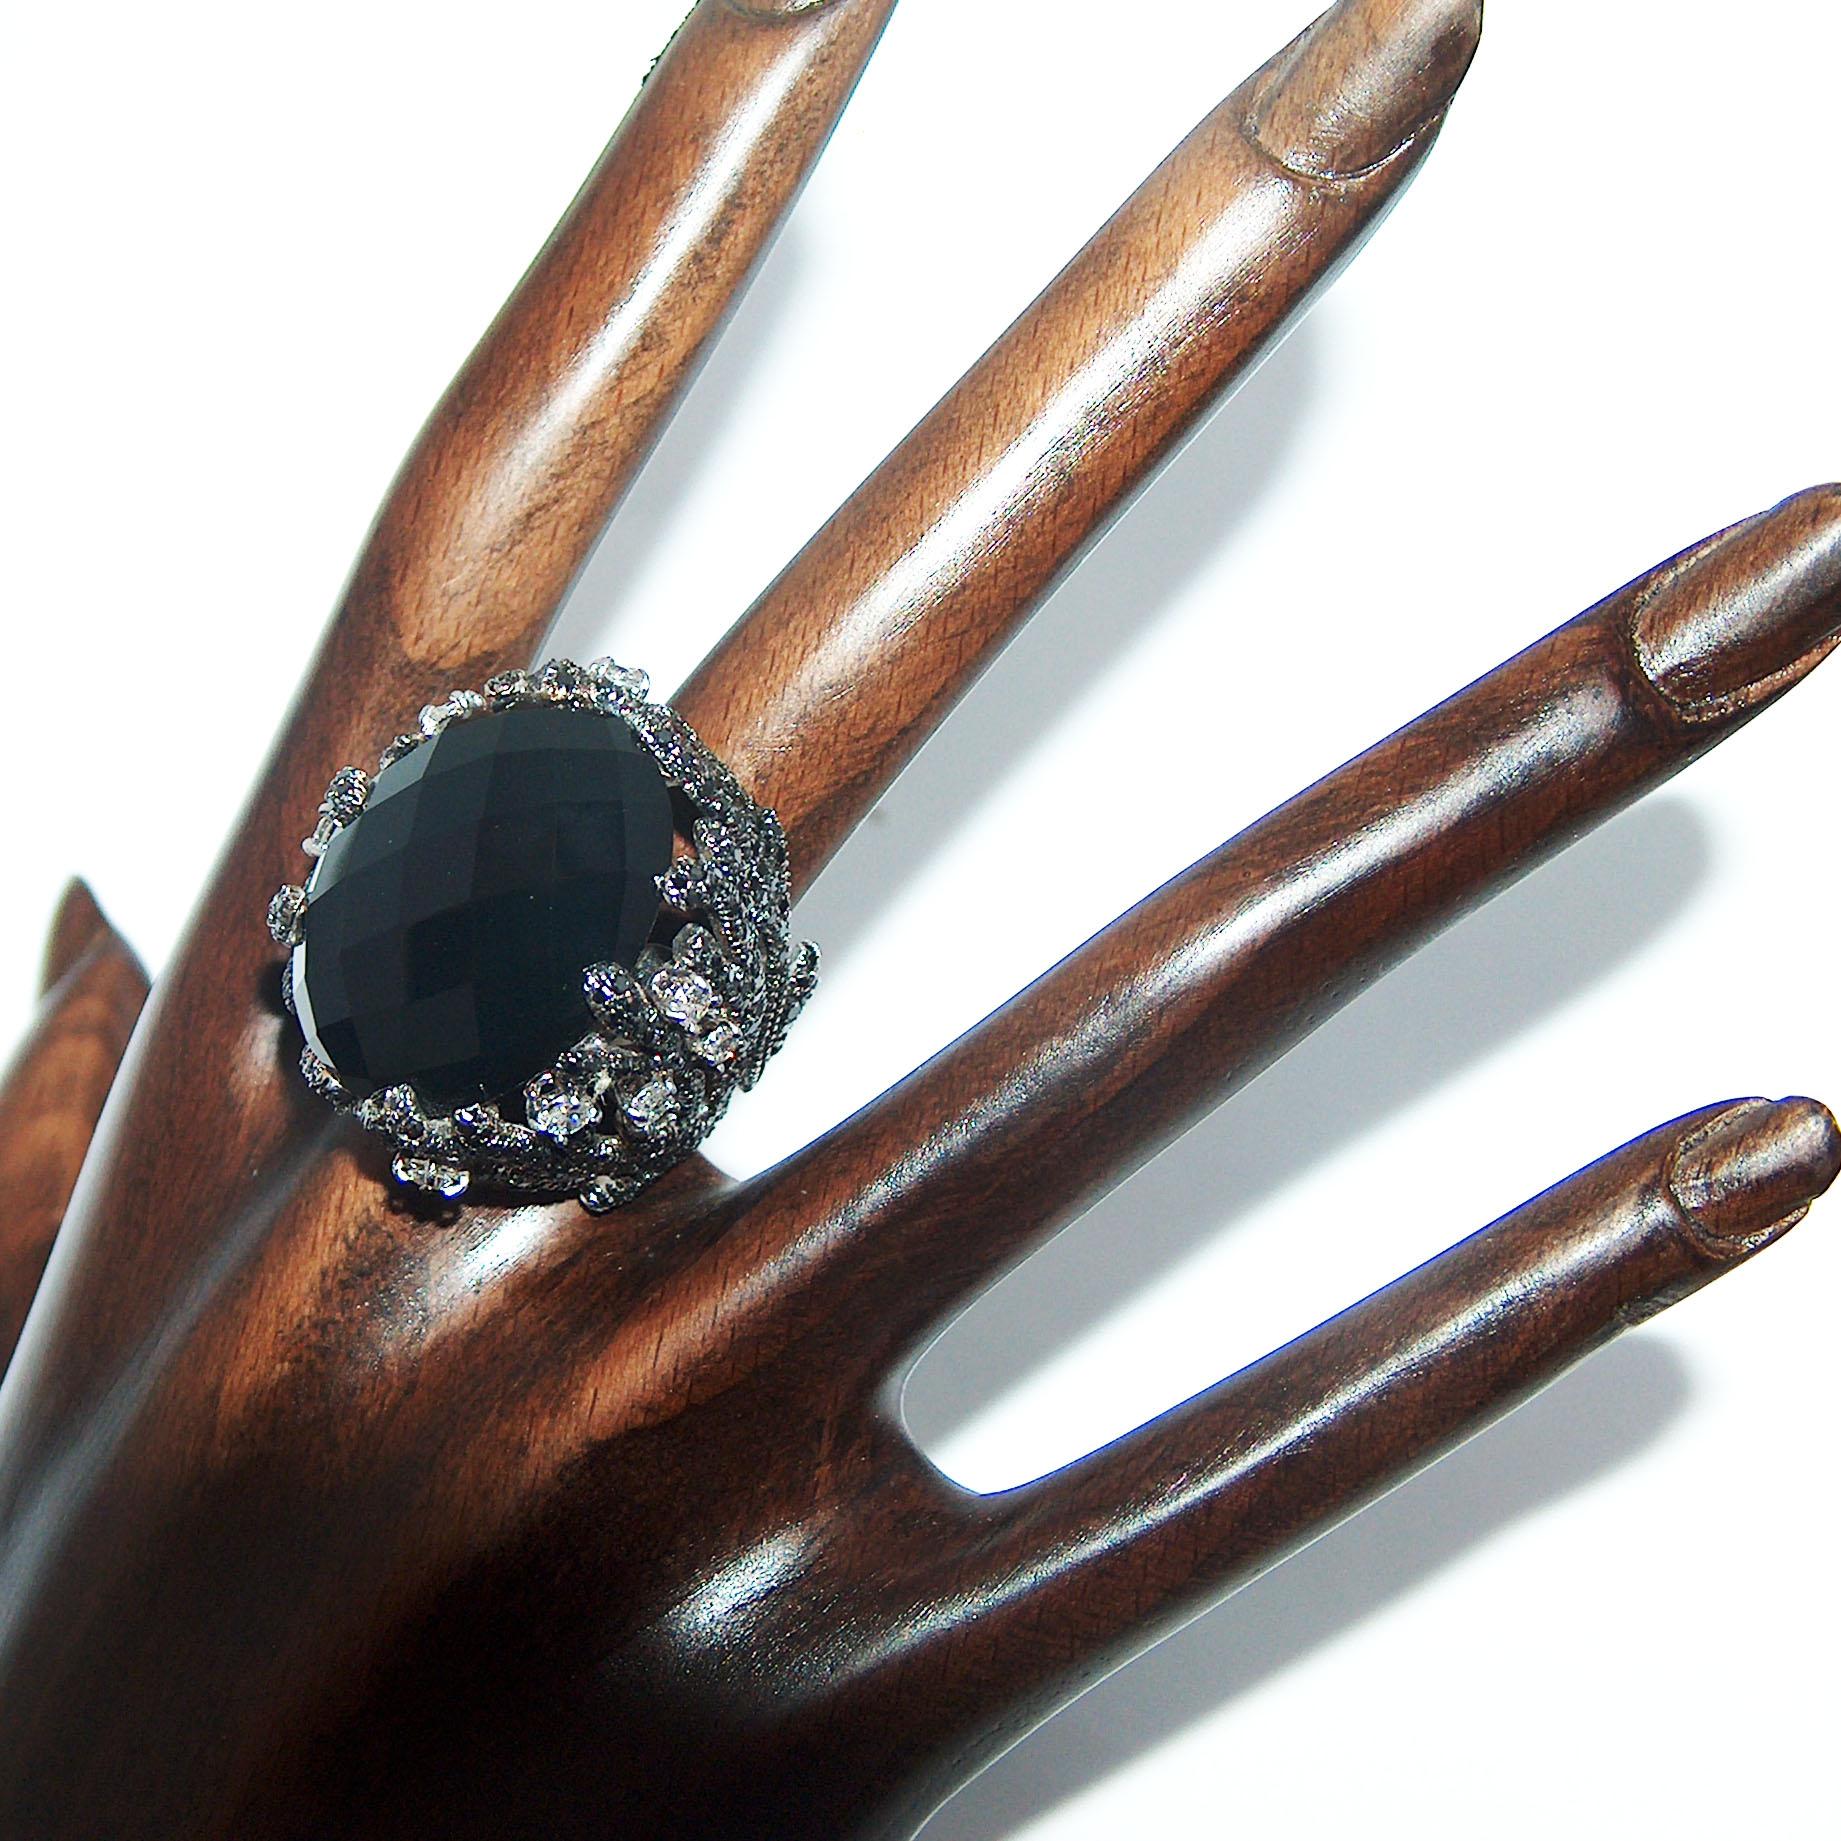 Paolo Piovan White and Black Diamonds, Onyx Ring in white gold black rhodium For Sale 3